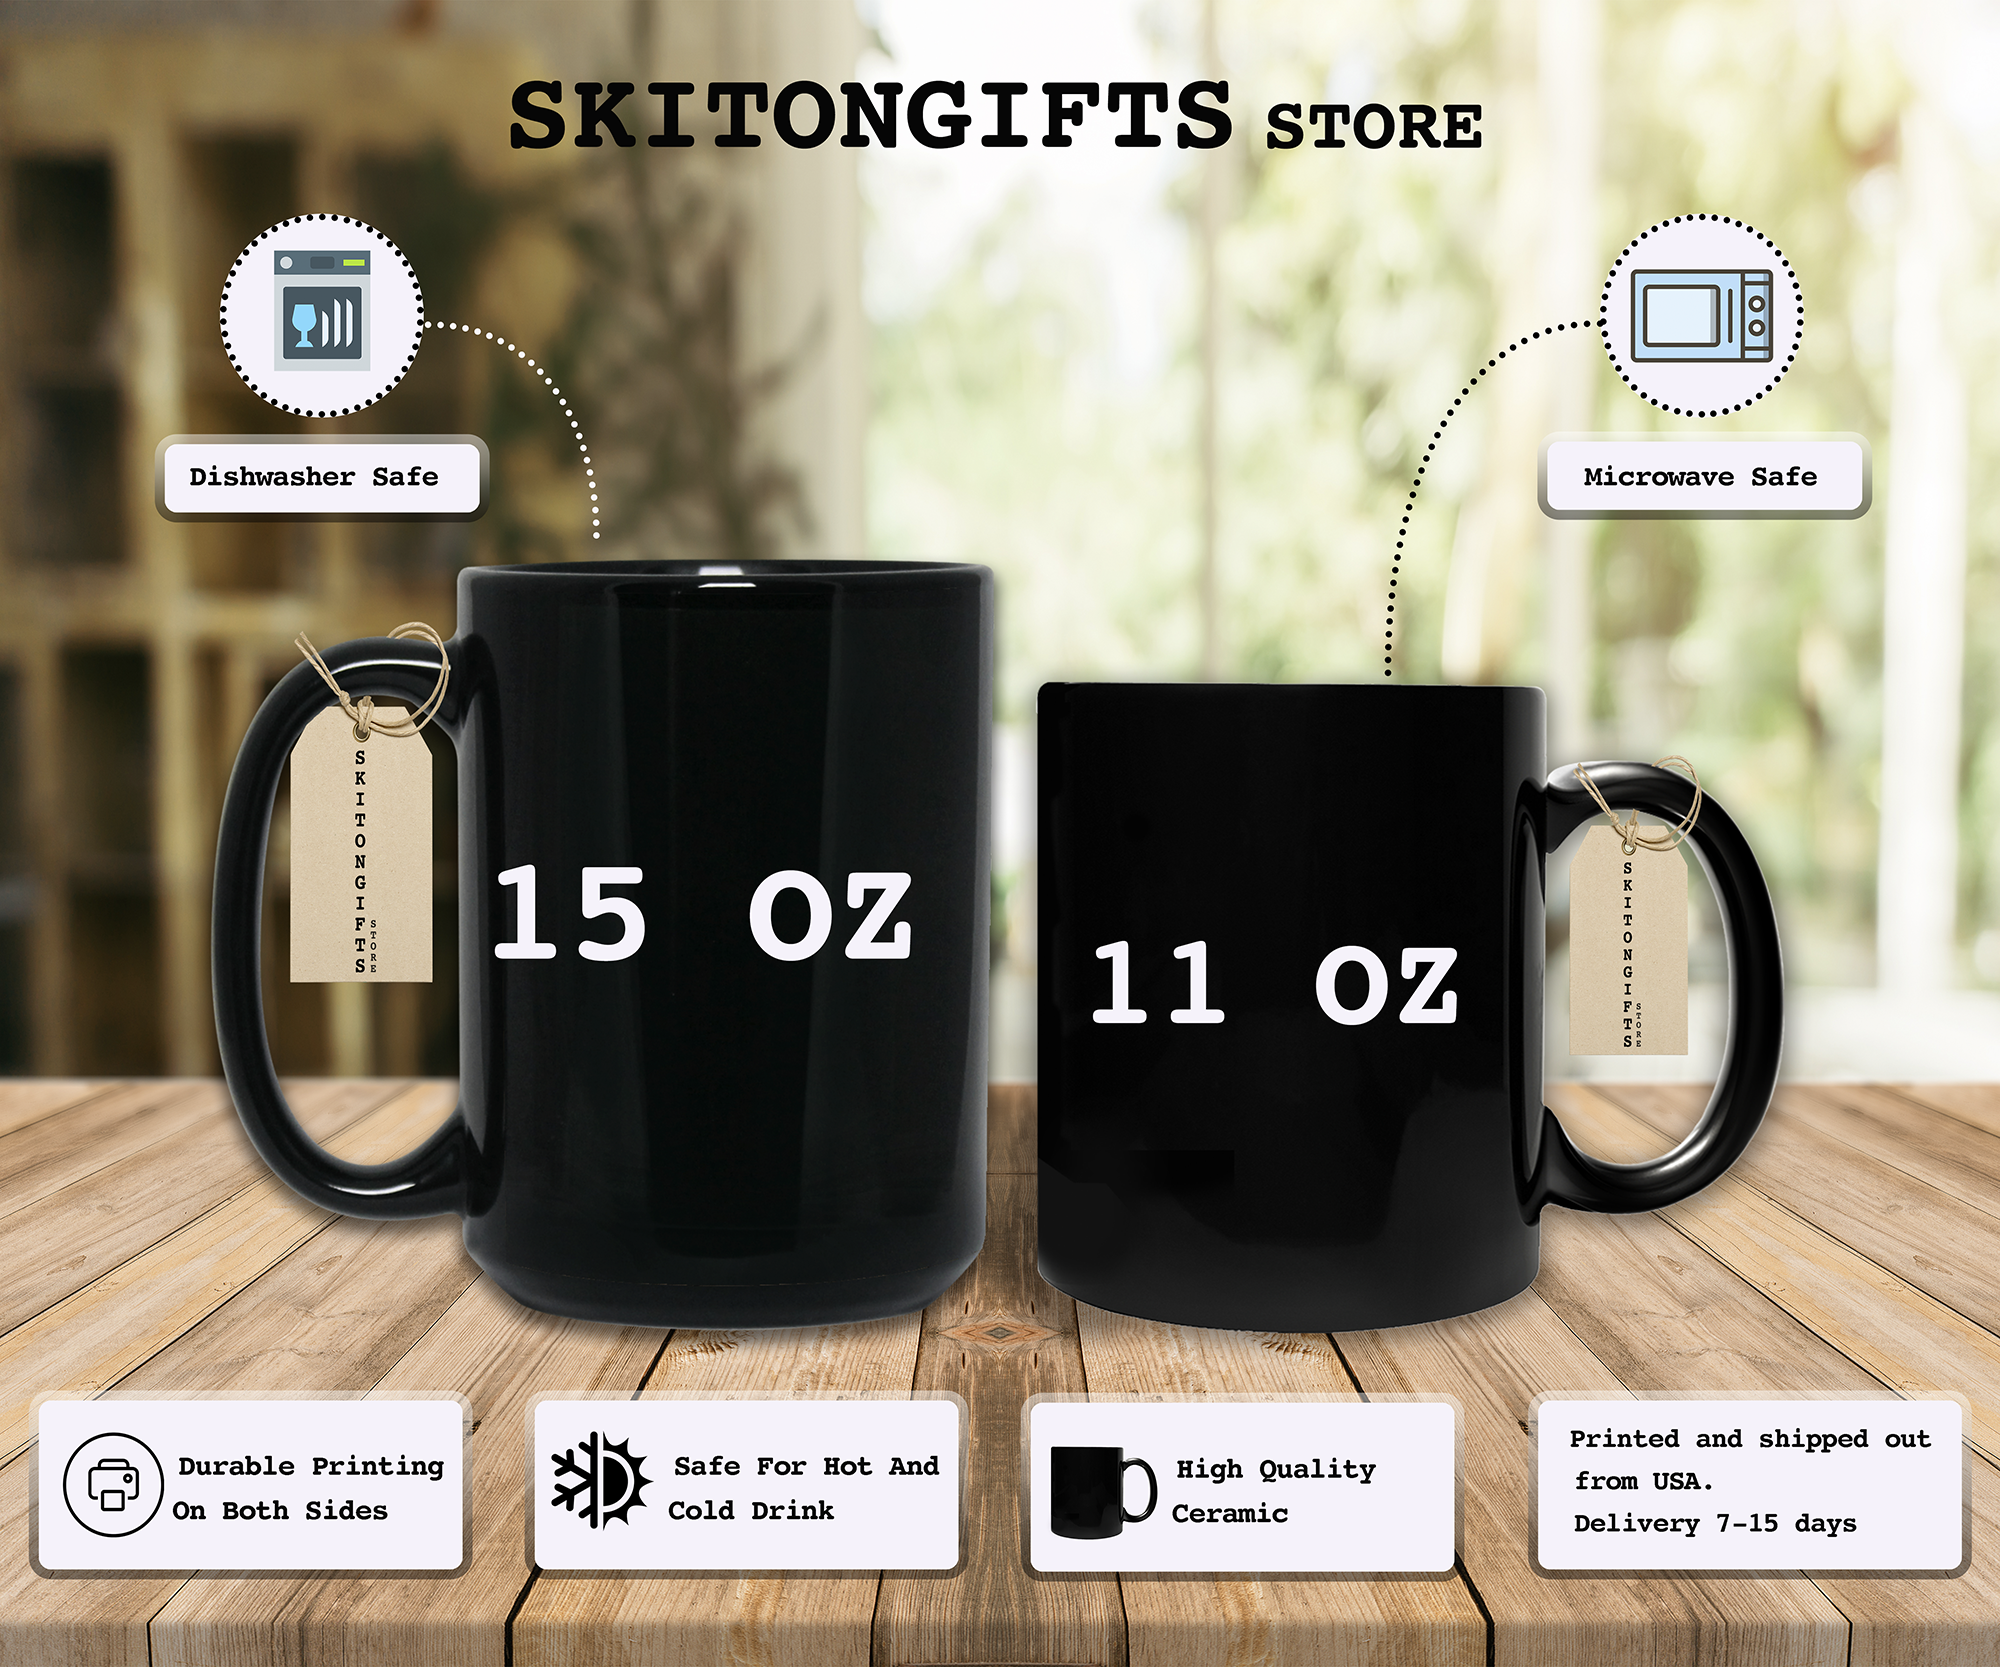 Skitongifts Funny Ceramic Coffee Mug For Birthday, Mother's Day, Father's Day, Christmas NH031221-Not Fragile Like A Flower But A Bomb Cpuvlhm